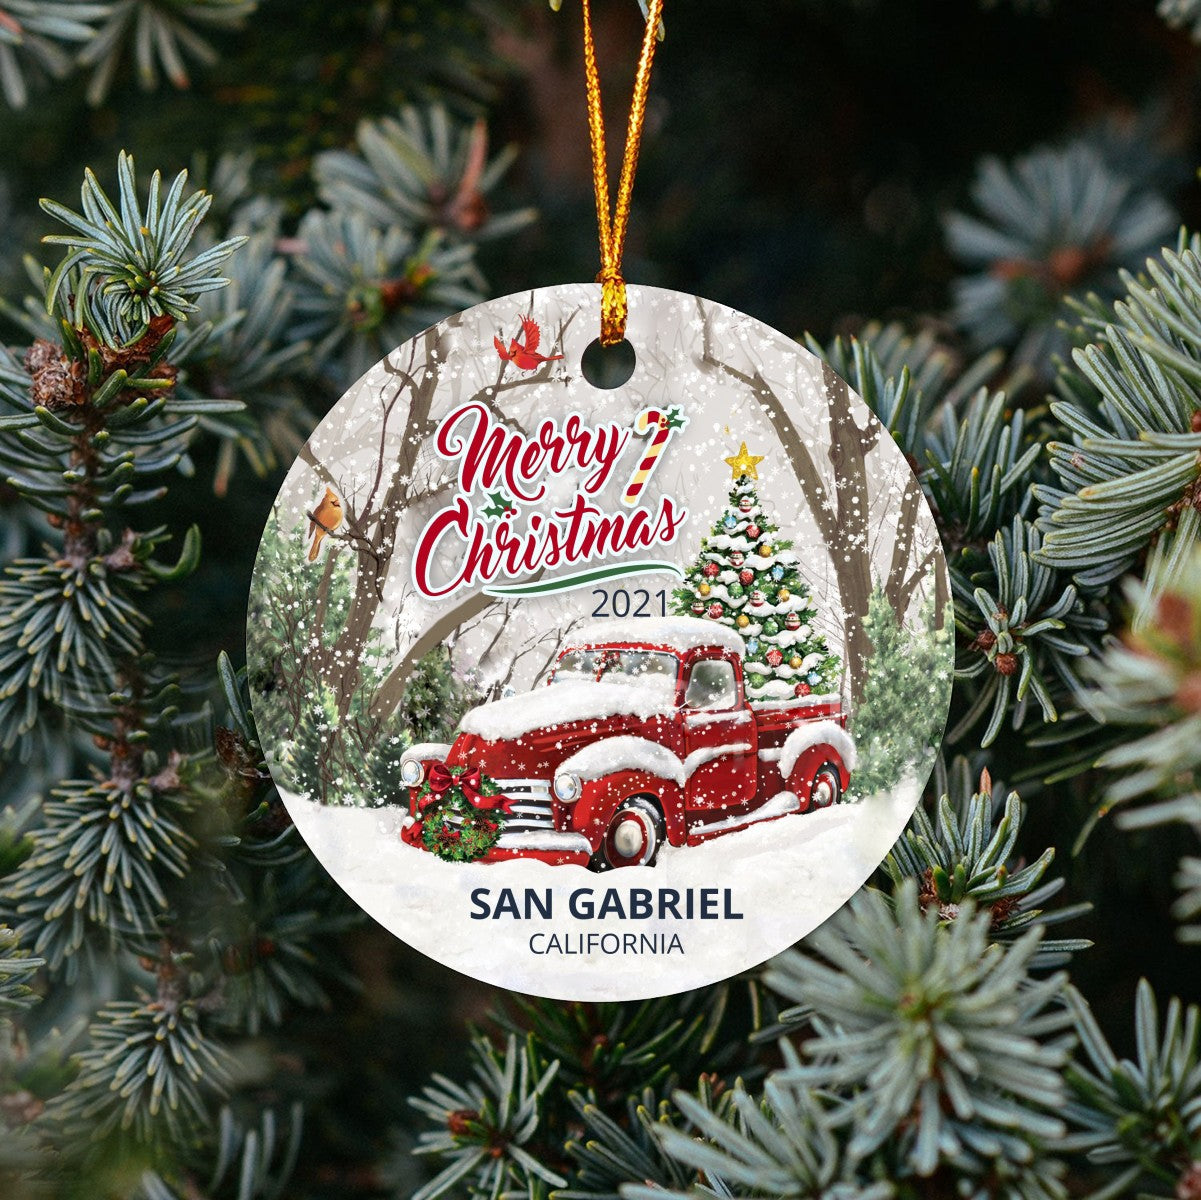 Christmas Tree Ornaments San Gabriel - Ornament Customize With Name City And State San Gabriel California CA - Red Truck Xmas Ornaments 3'' Plastic Gift For Family, Friend And Housewarming